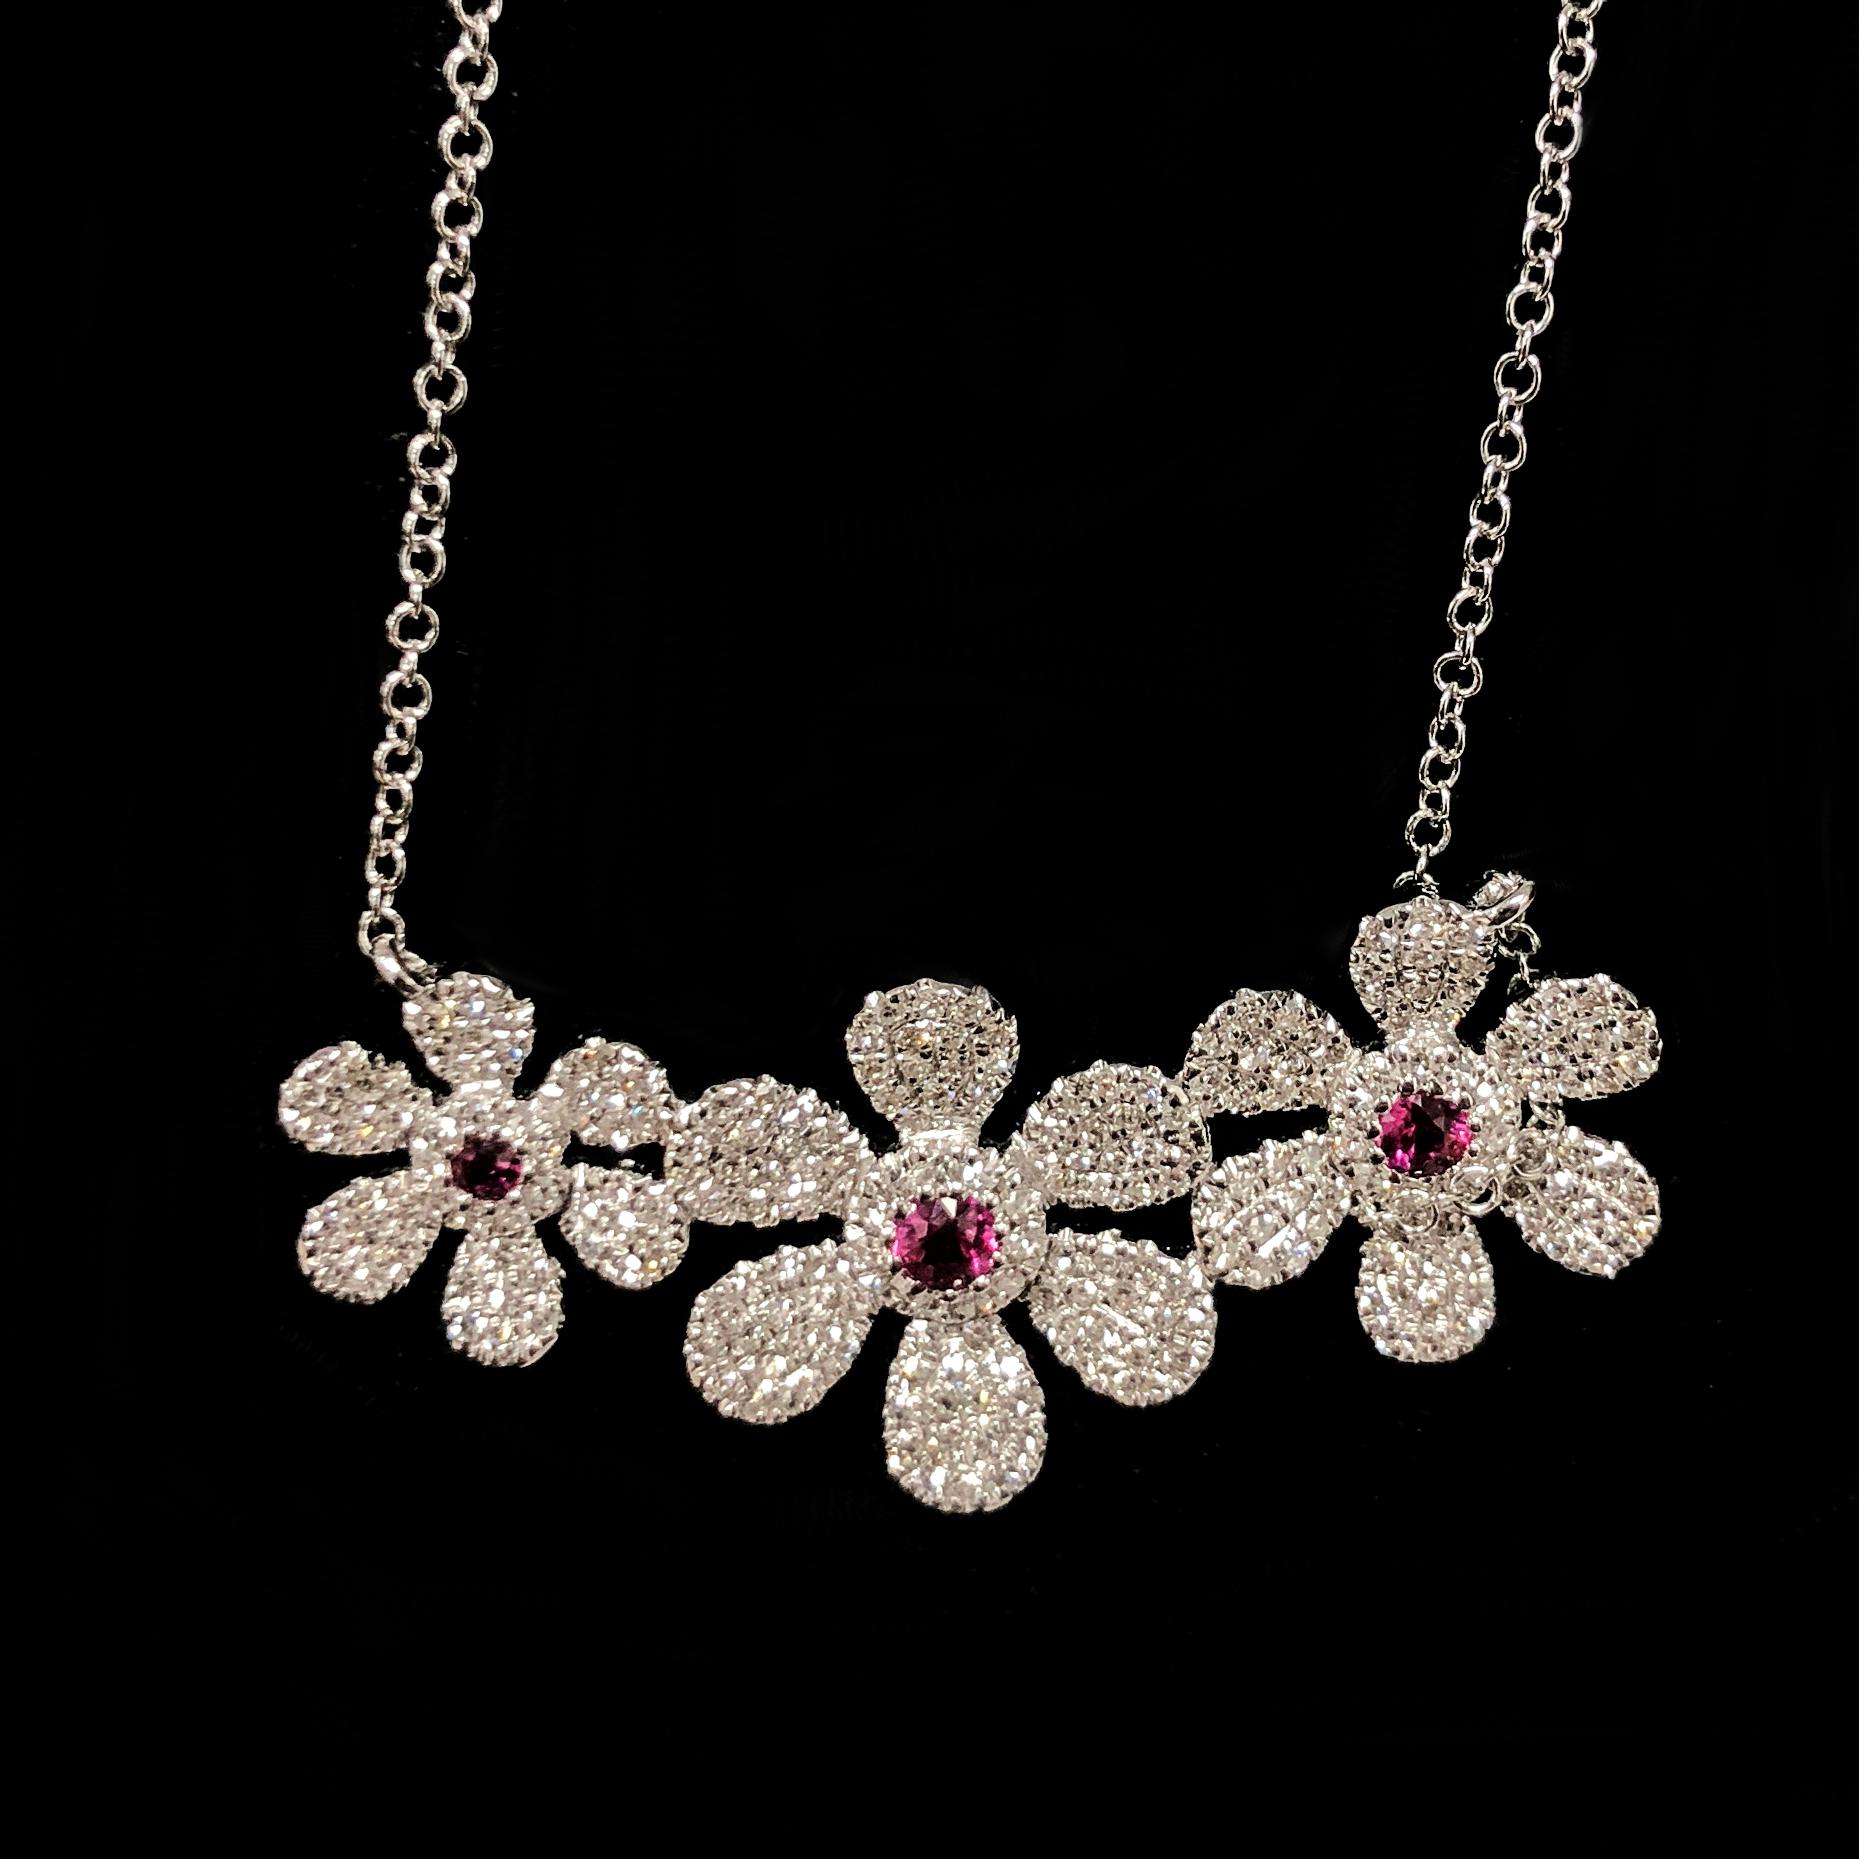 0.48ct Diamond & 0.16ct Ruby 14k White Gold Flower Necklace


1.25